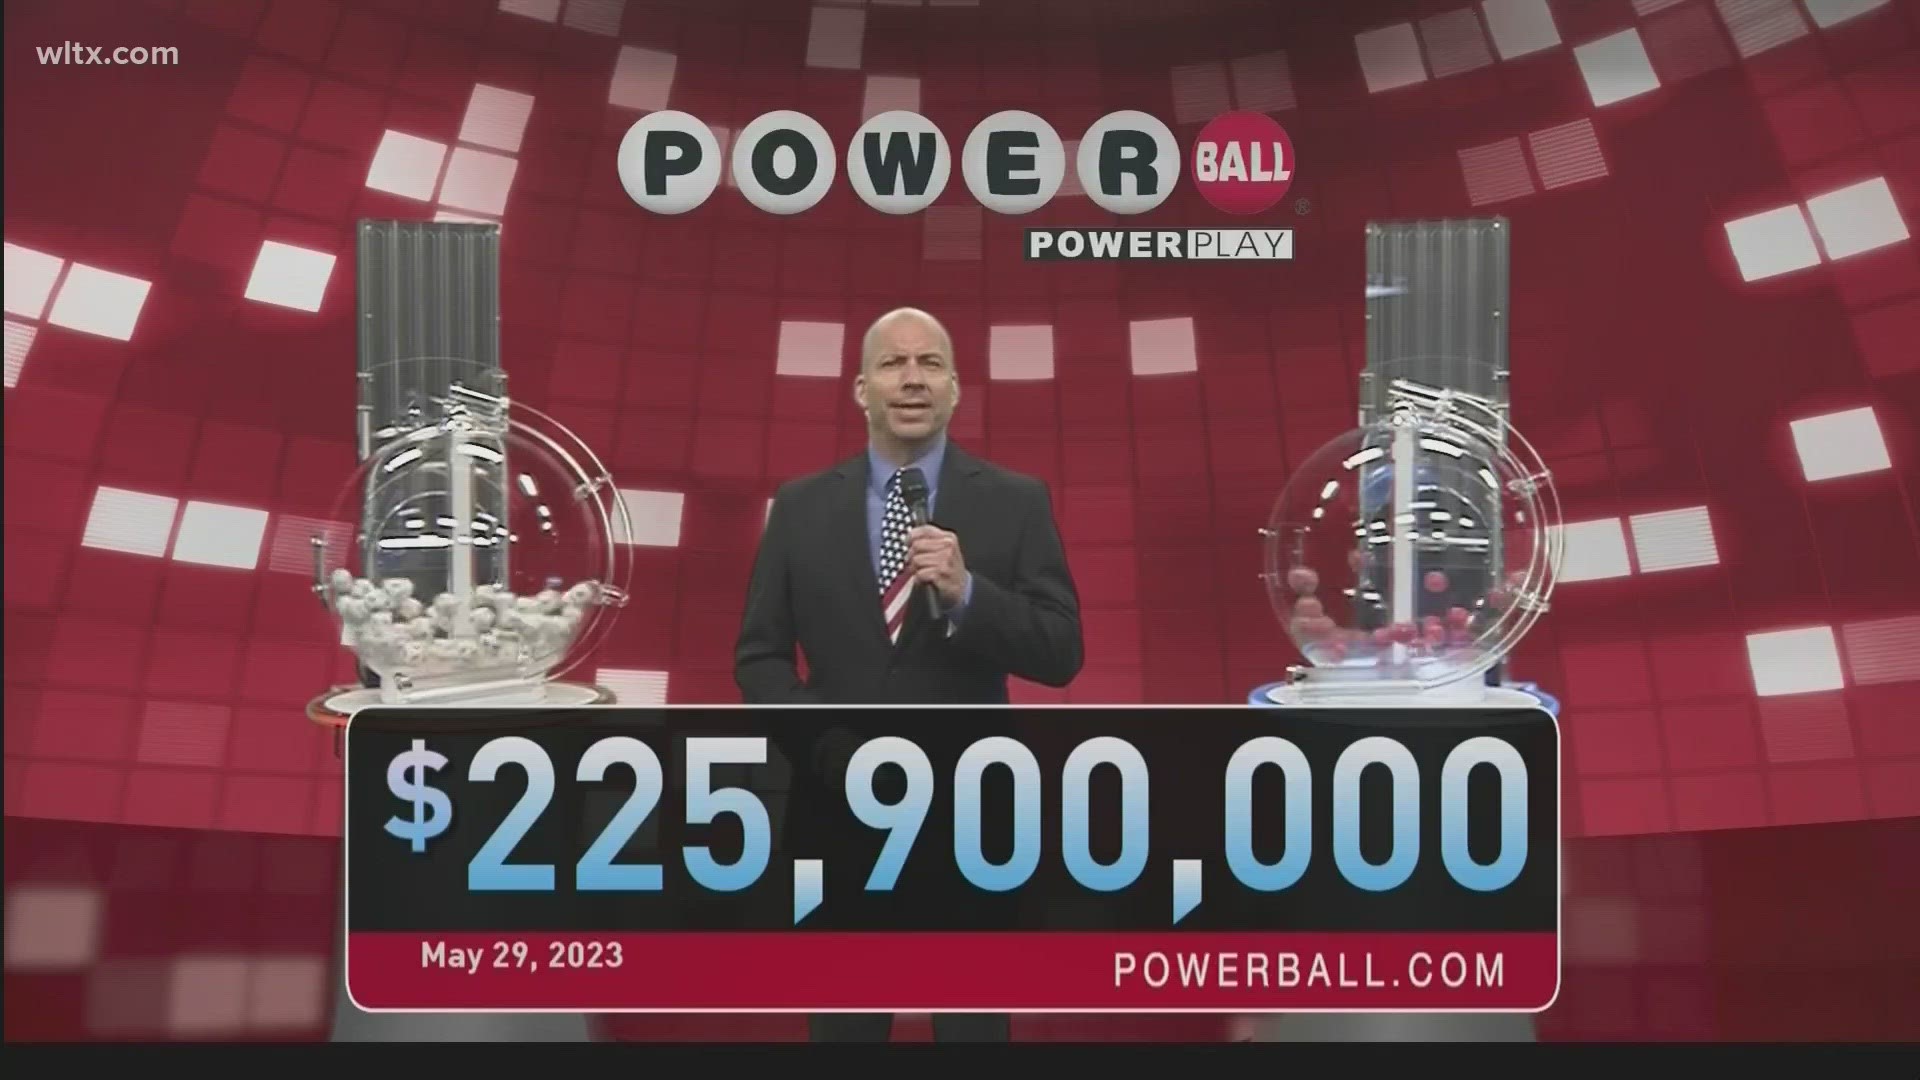 Here are the winning Powerball numbers for Monday, May 29, 2023.